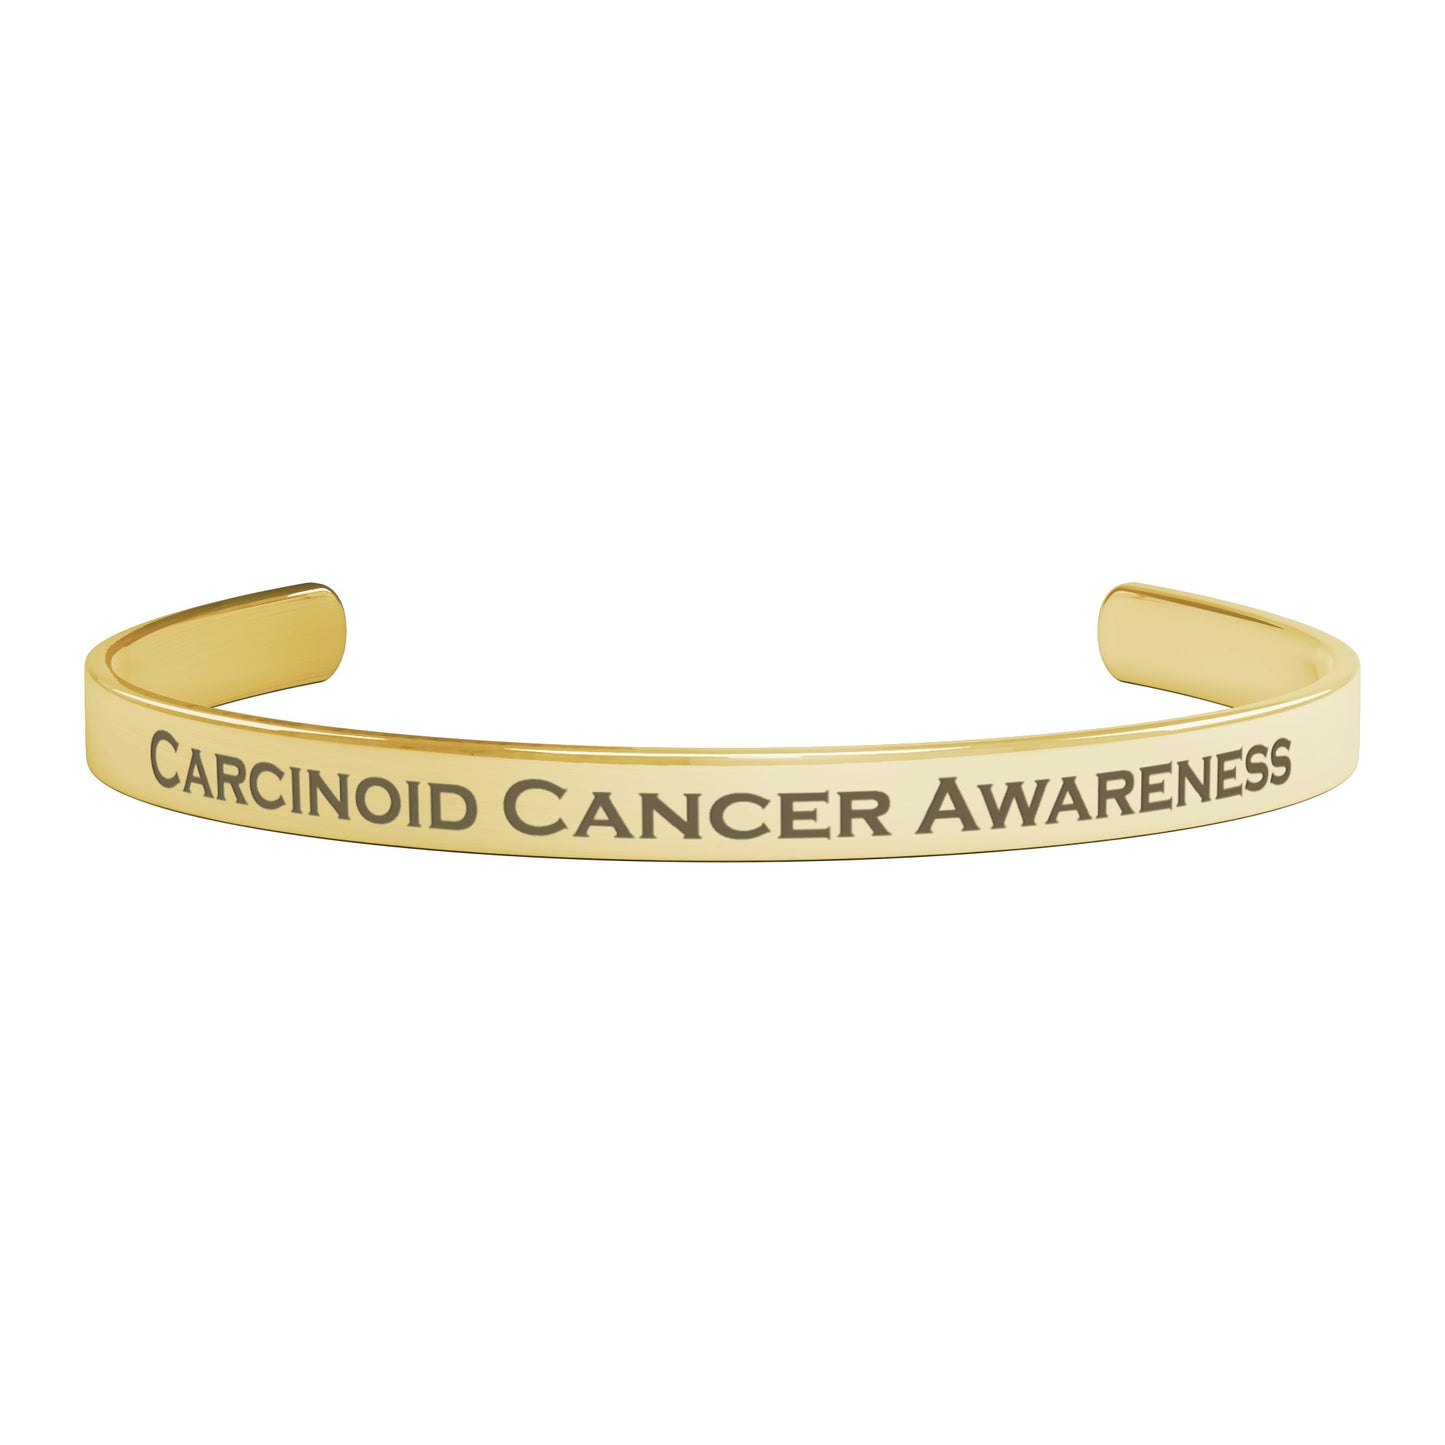 Personalized Carcinoid Cancer Awareness Cuff Bracelet